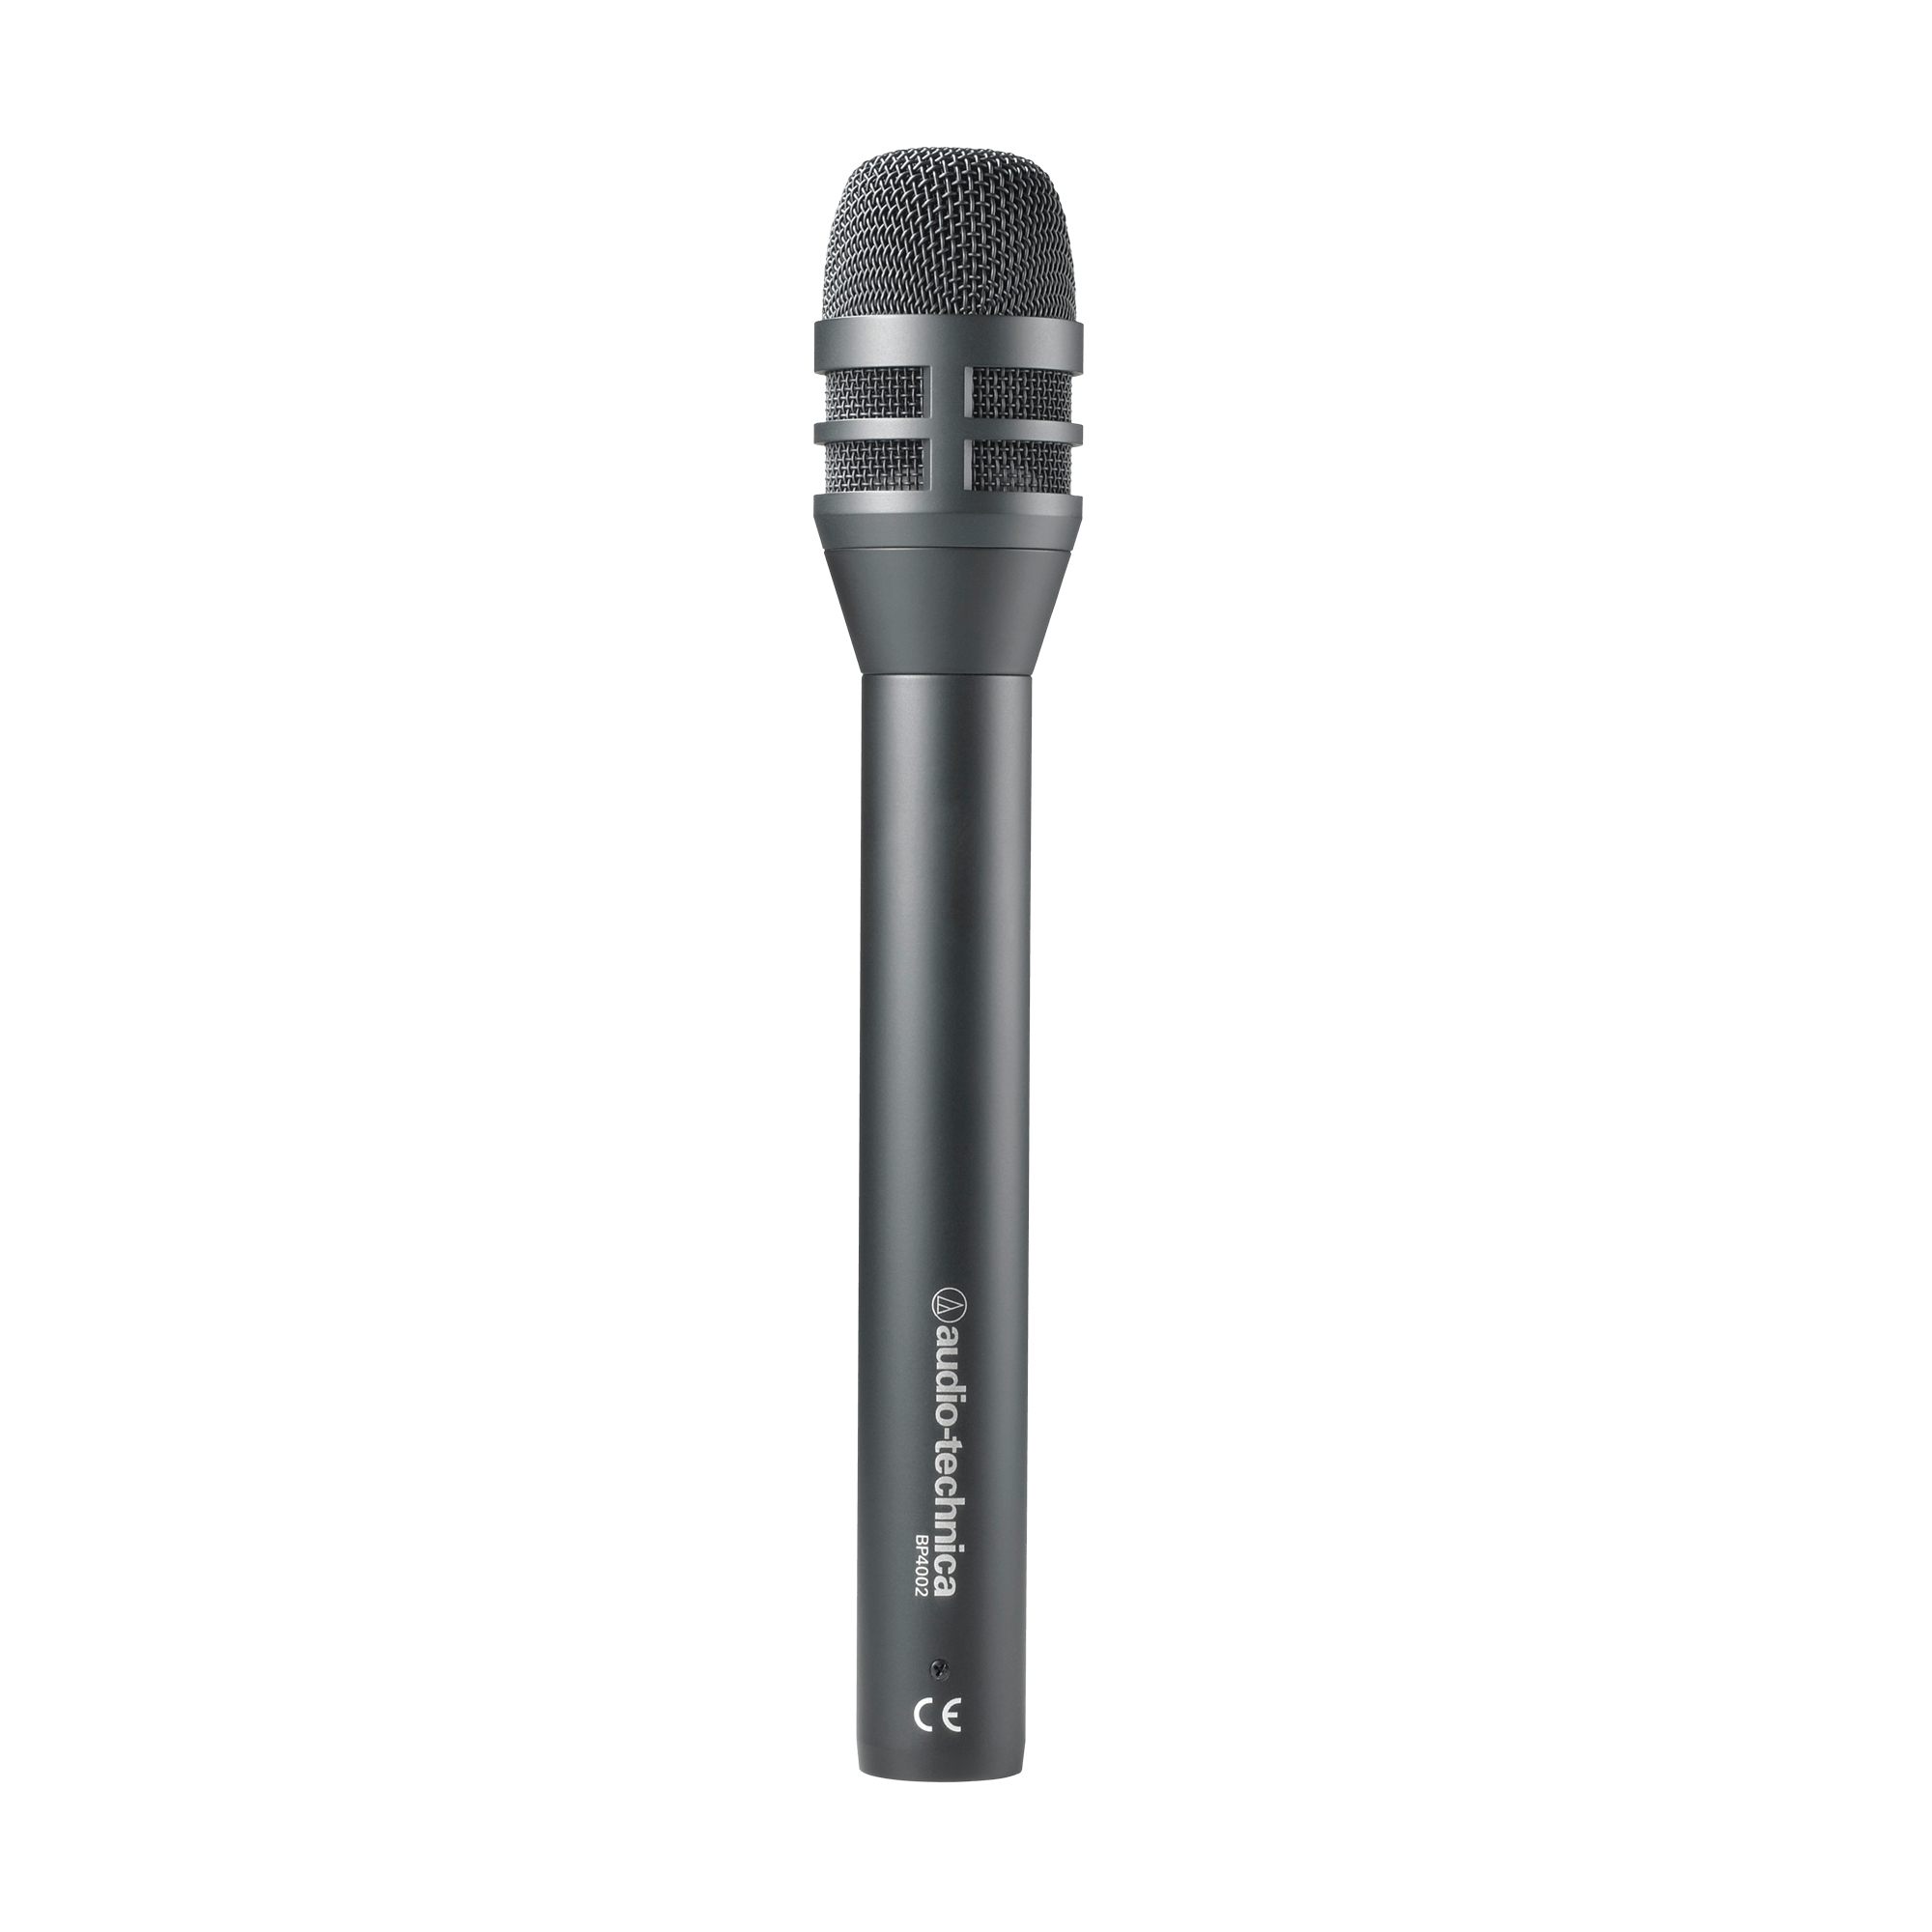 Microphone main dynamique omnidirectionnel